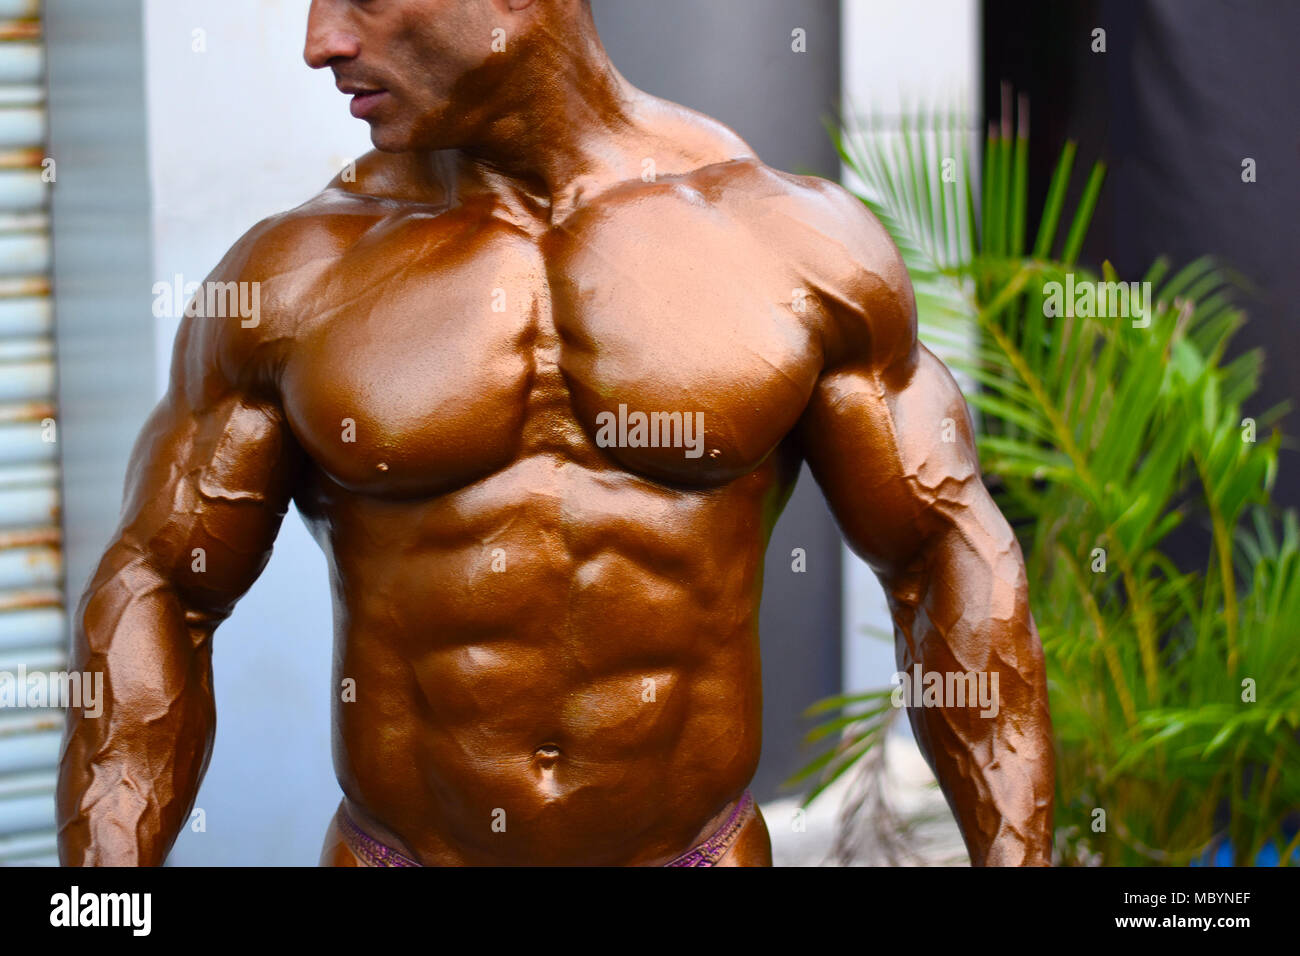 Young bodybuilder showing chest muscles in front pose Indian Body Builders  Association show, Balewadi, Baner, Pune Maharashtra India Stock Photo -  Alamy